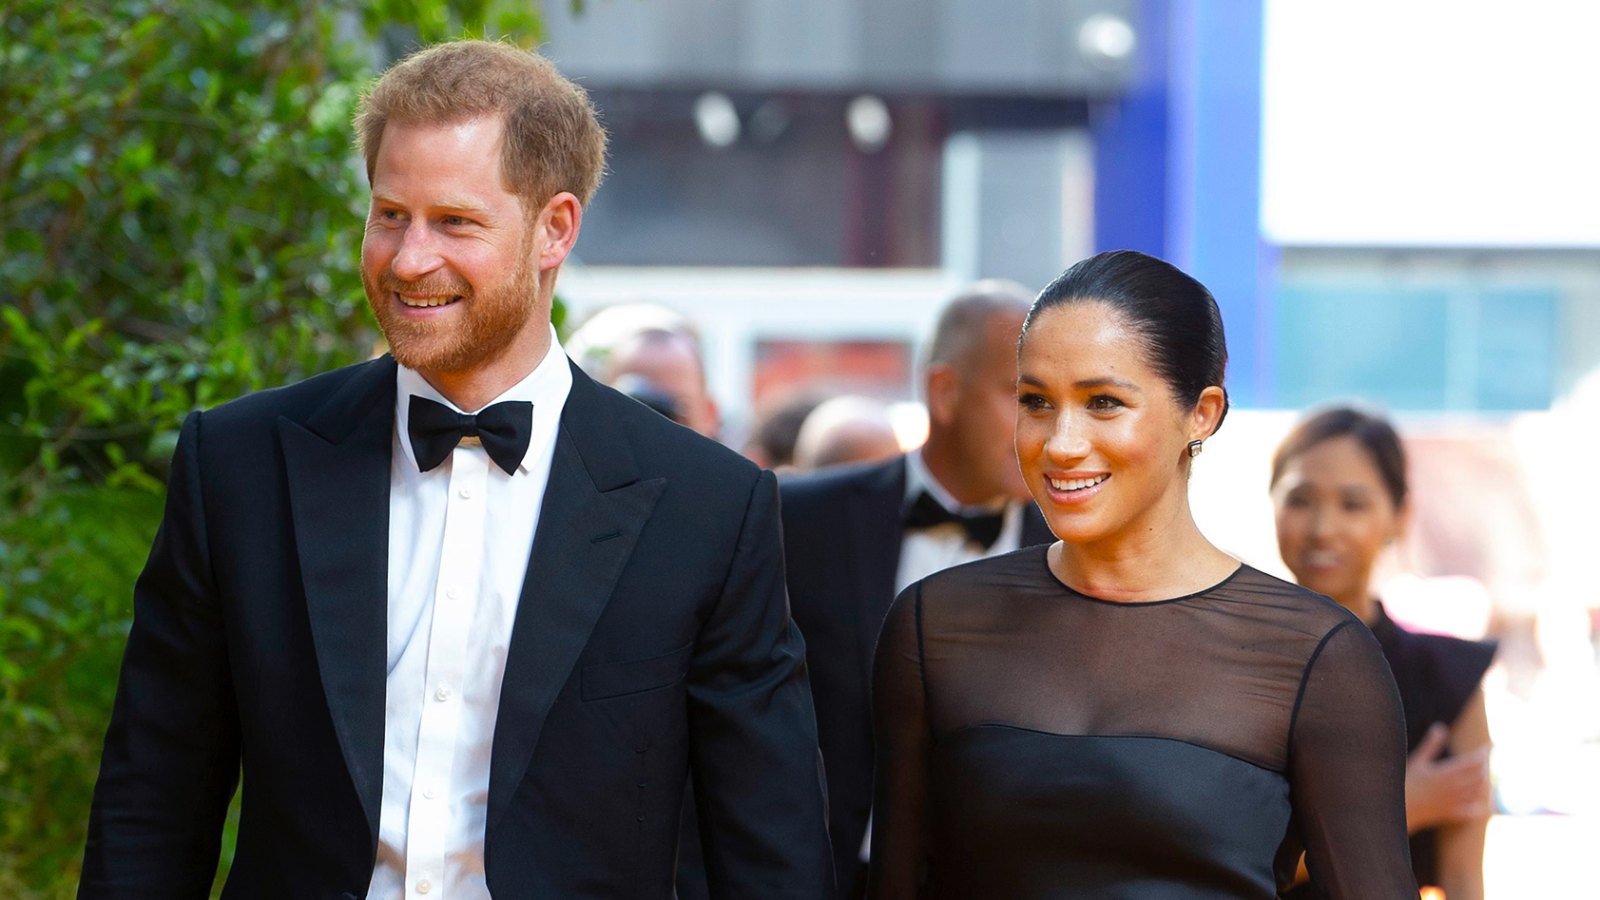 Revisit Duchess Meghan's New Year’s Resolution Before Meeting Prince Harry